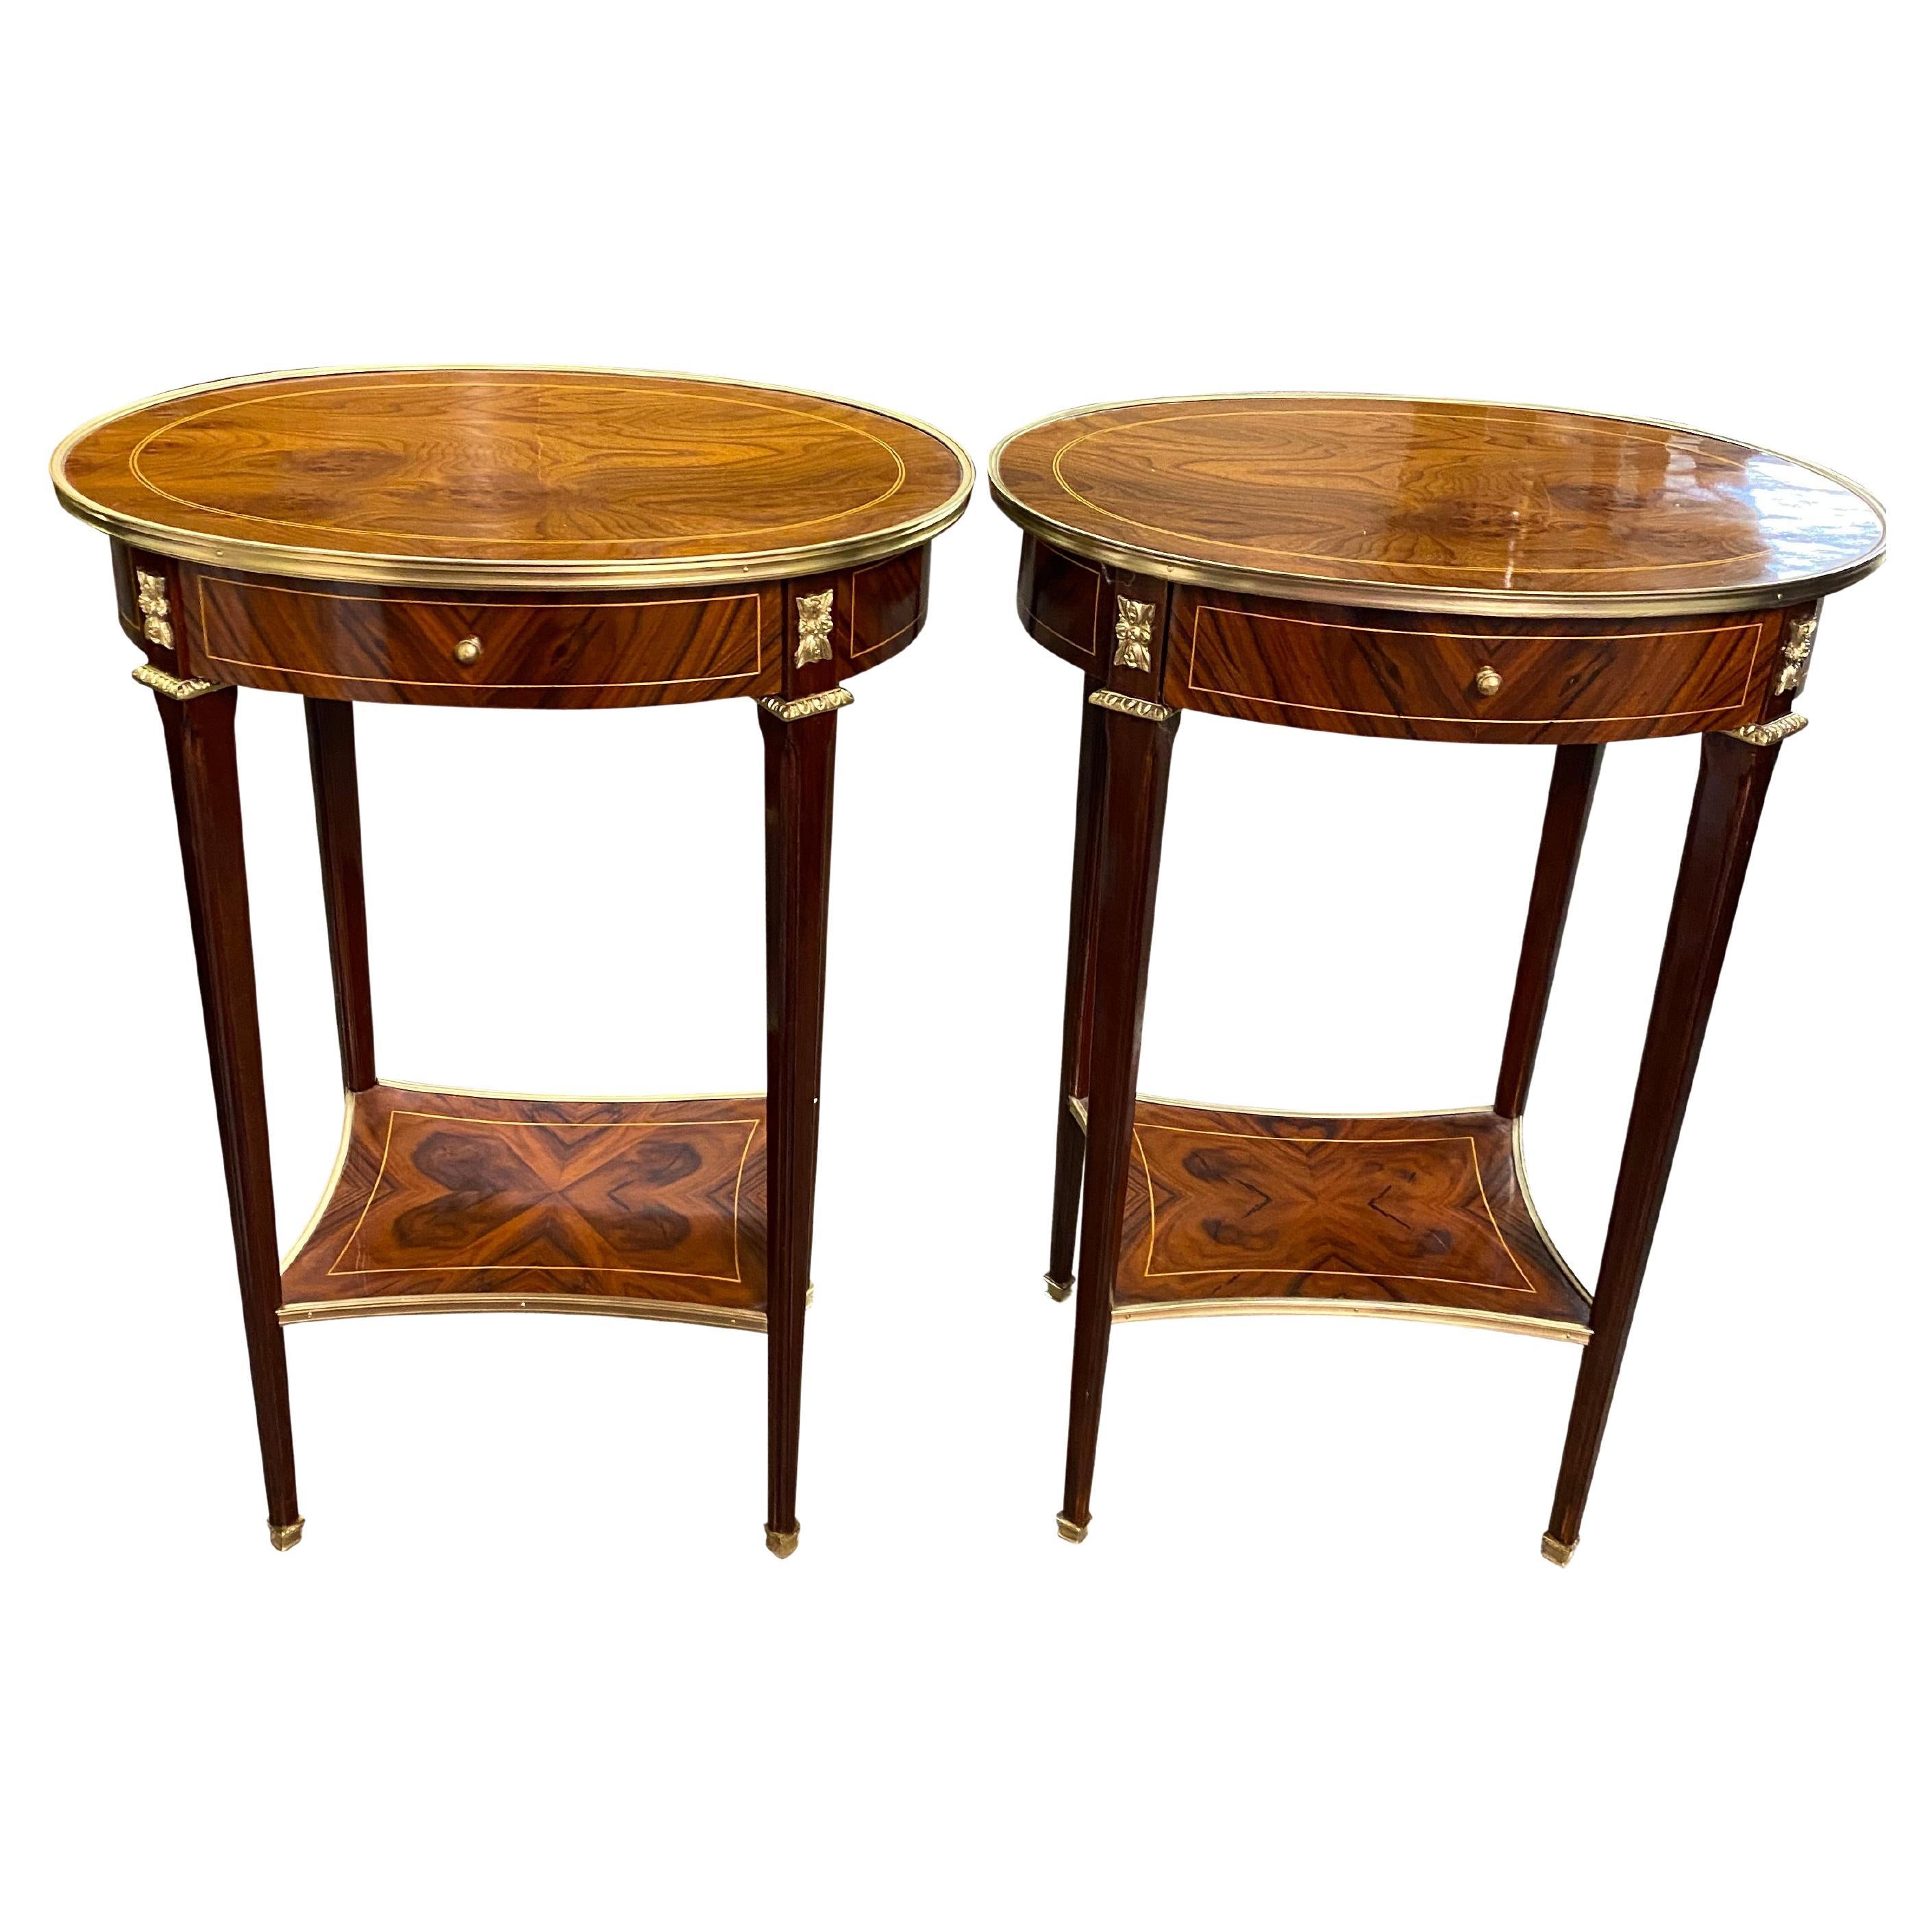 Pair of Oval Top 20th Century English Regency Style Side Tables